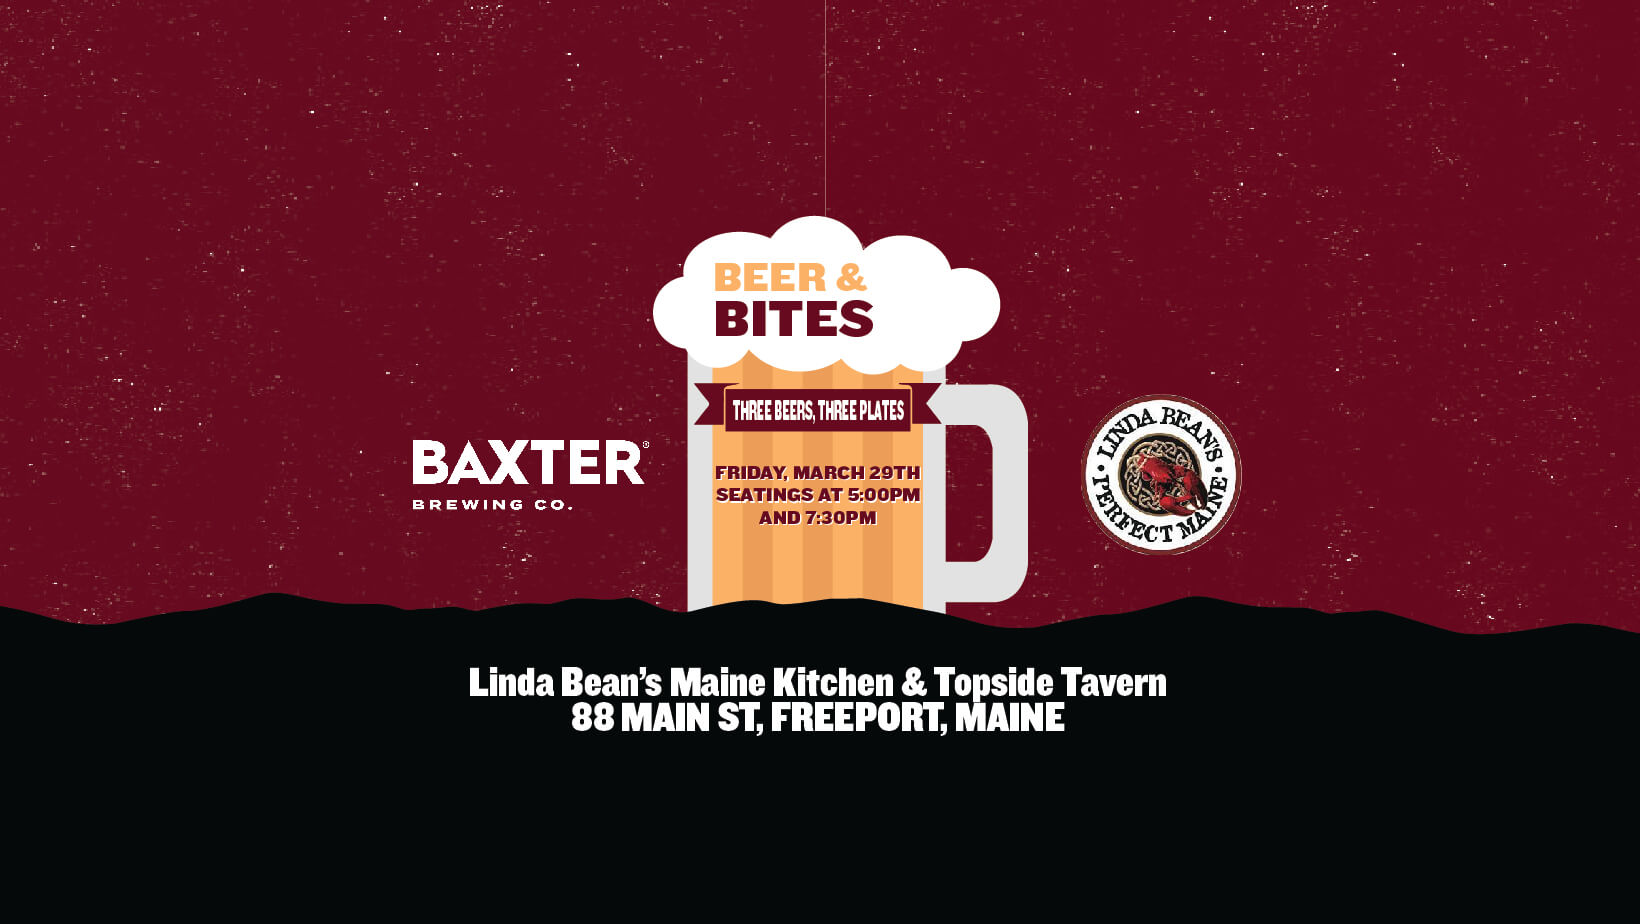 image promoting a beer dinner on March 22nd at Linda Bean's Maine Kitchen.